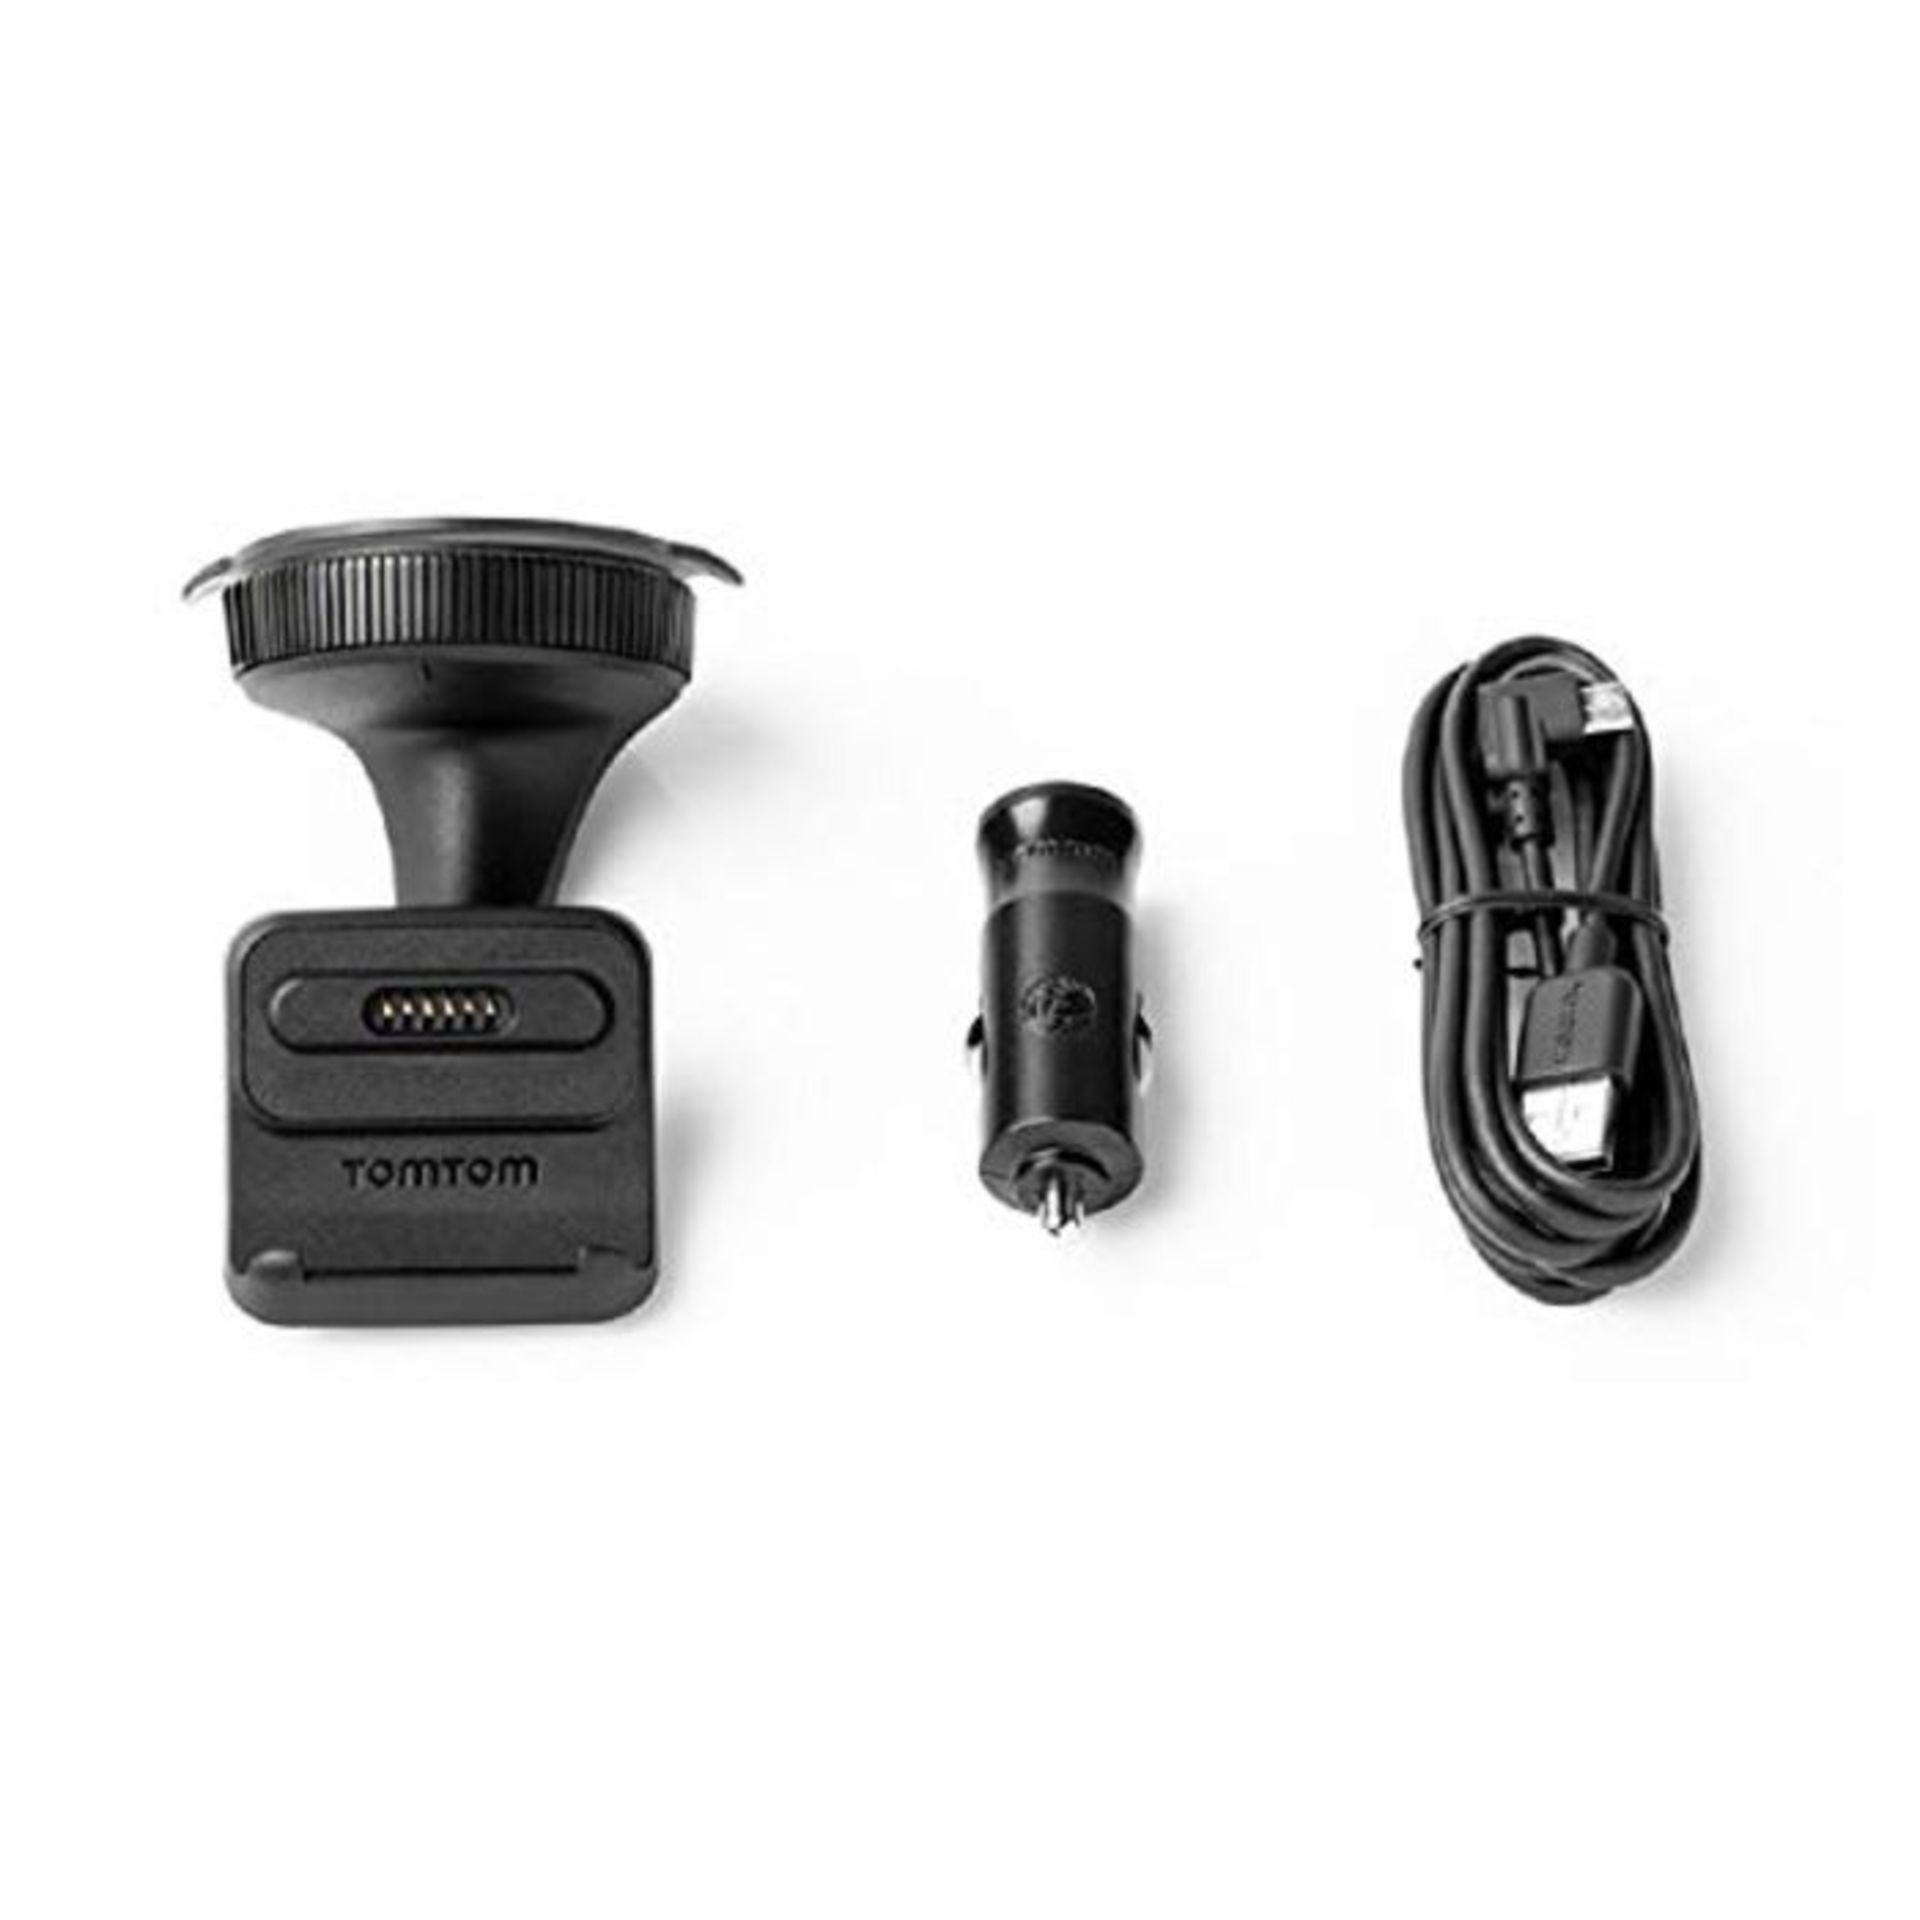 TomTom Sat Nav Windscreen Mount Click-and-Drive plus Car Charger and USB Cable for all